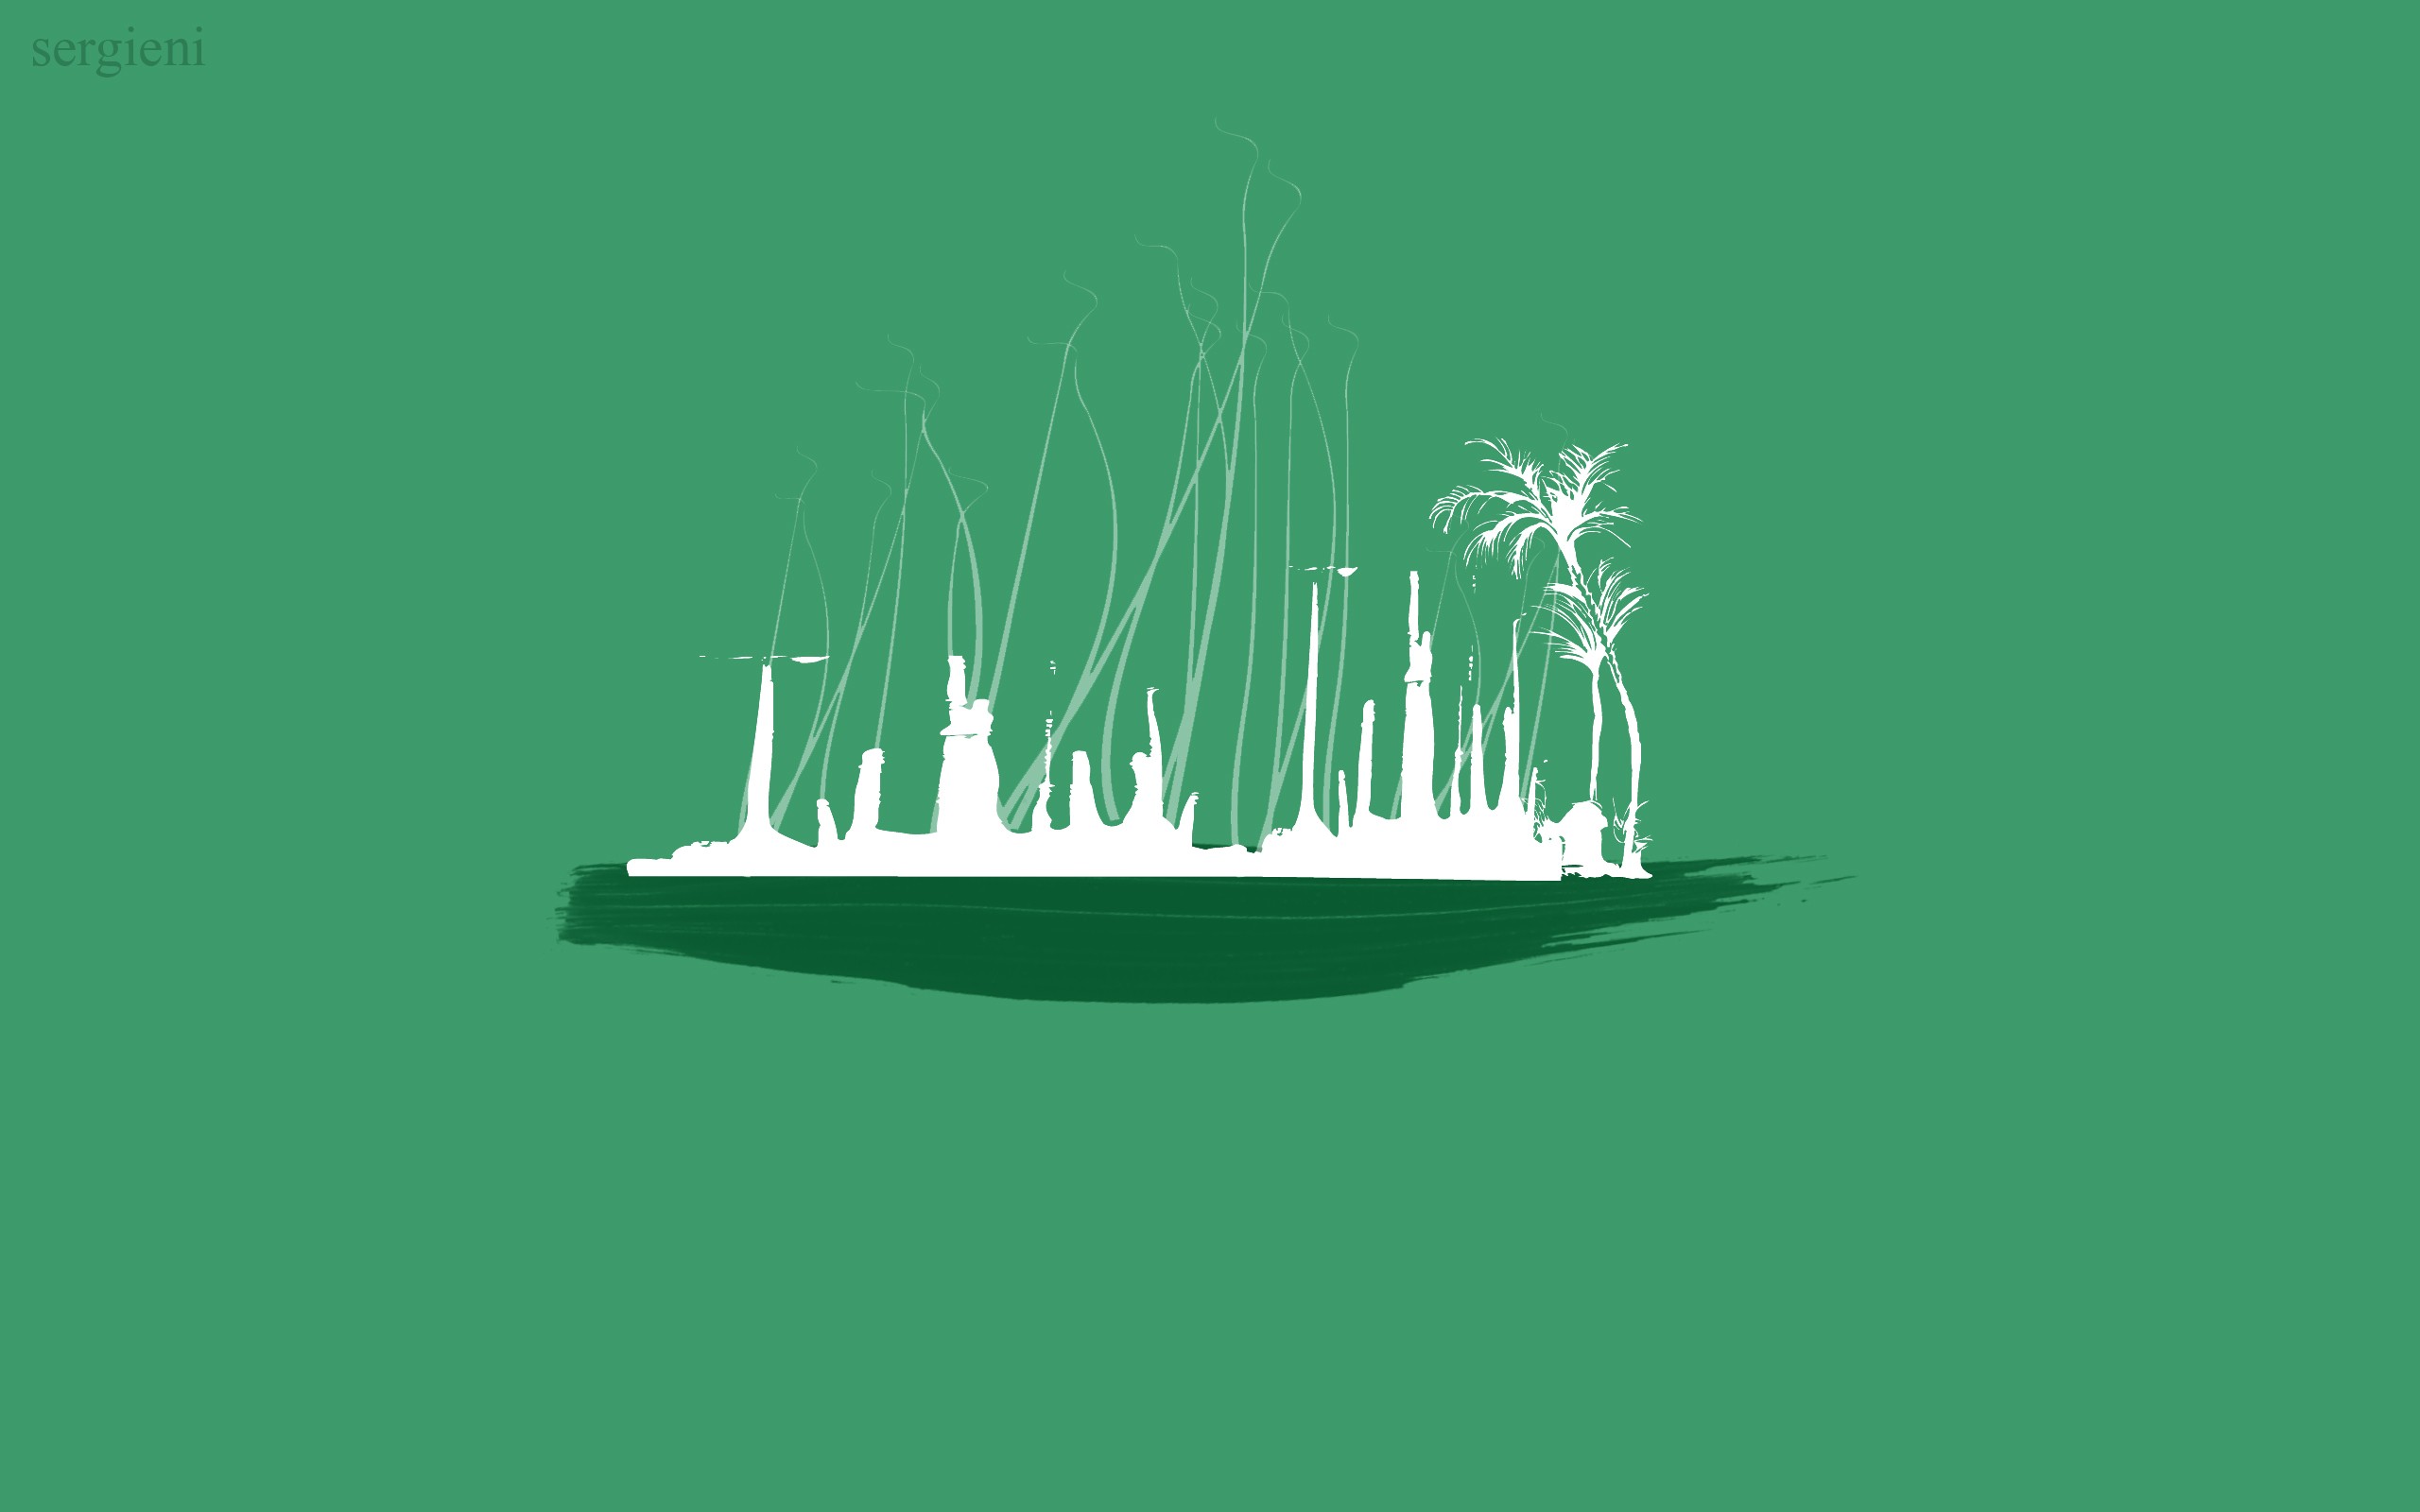 General 2560x1600 artwork green background simple background palm trees green minimalism